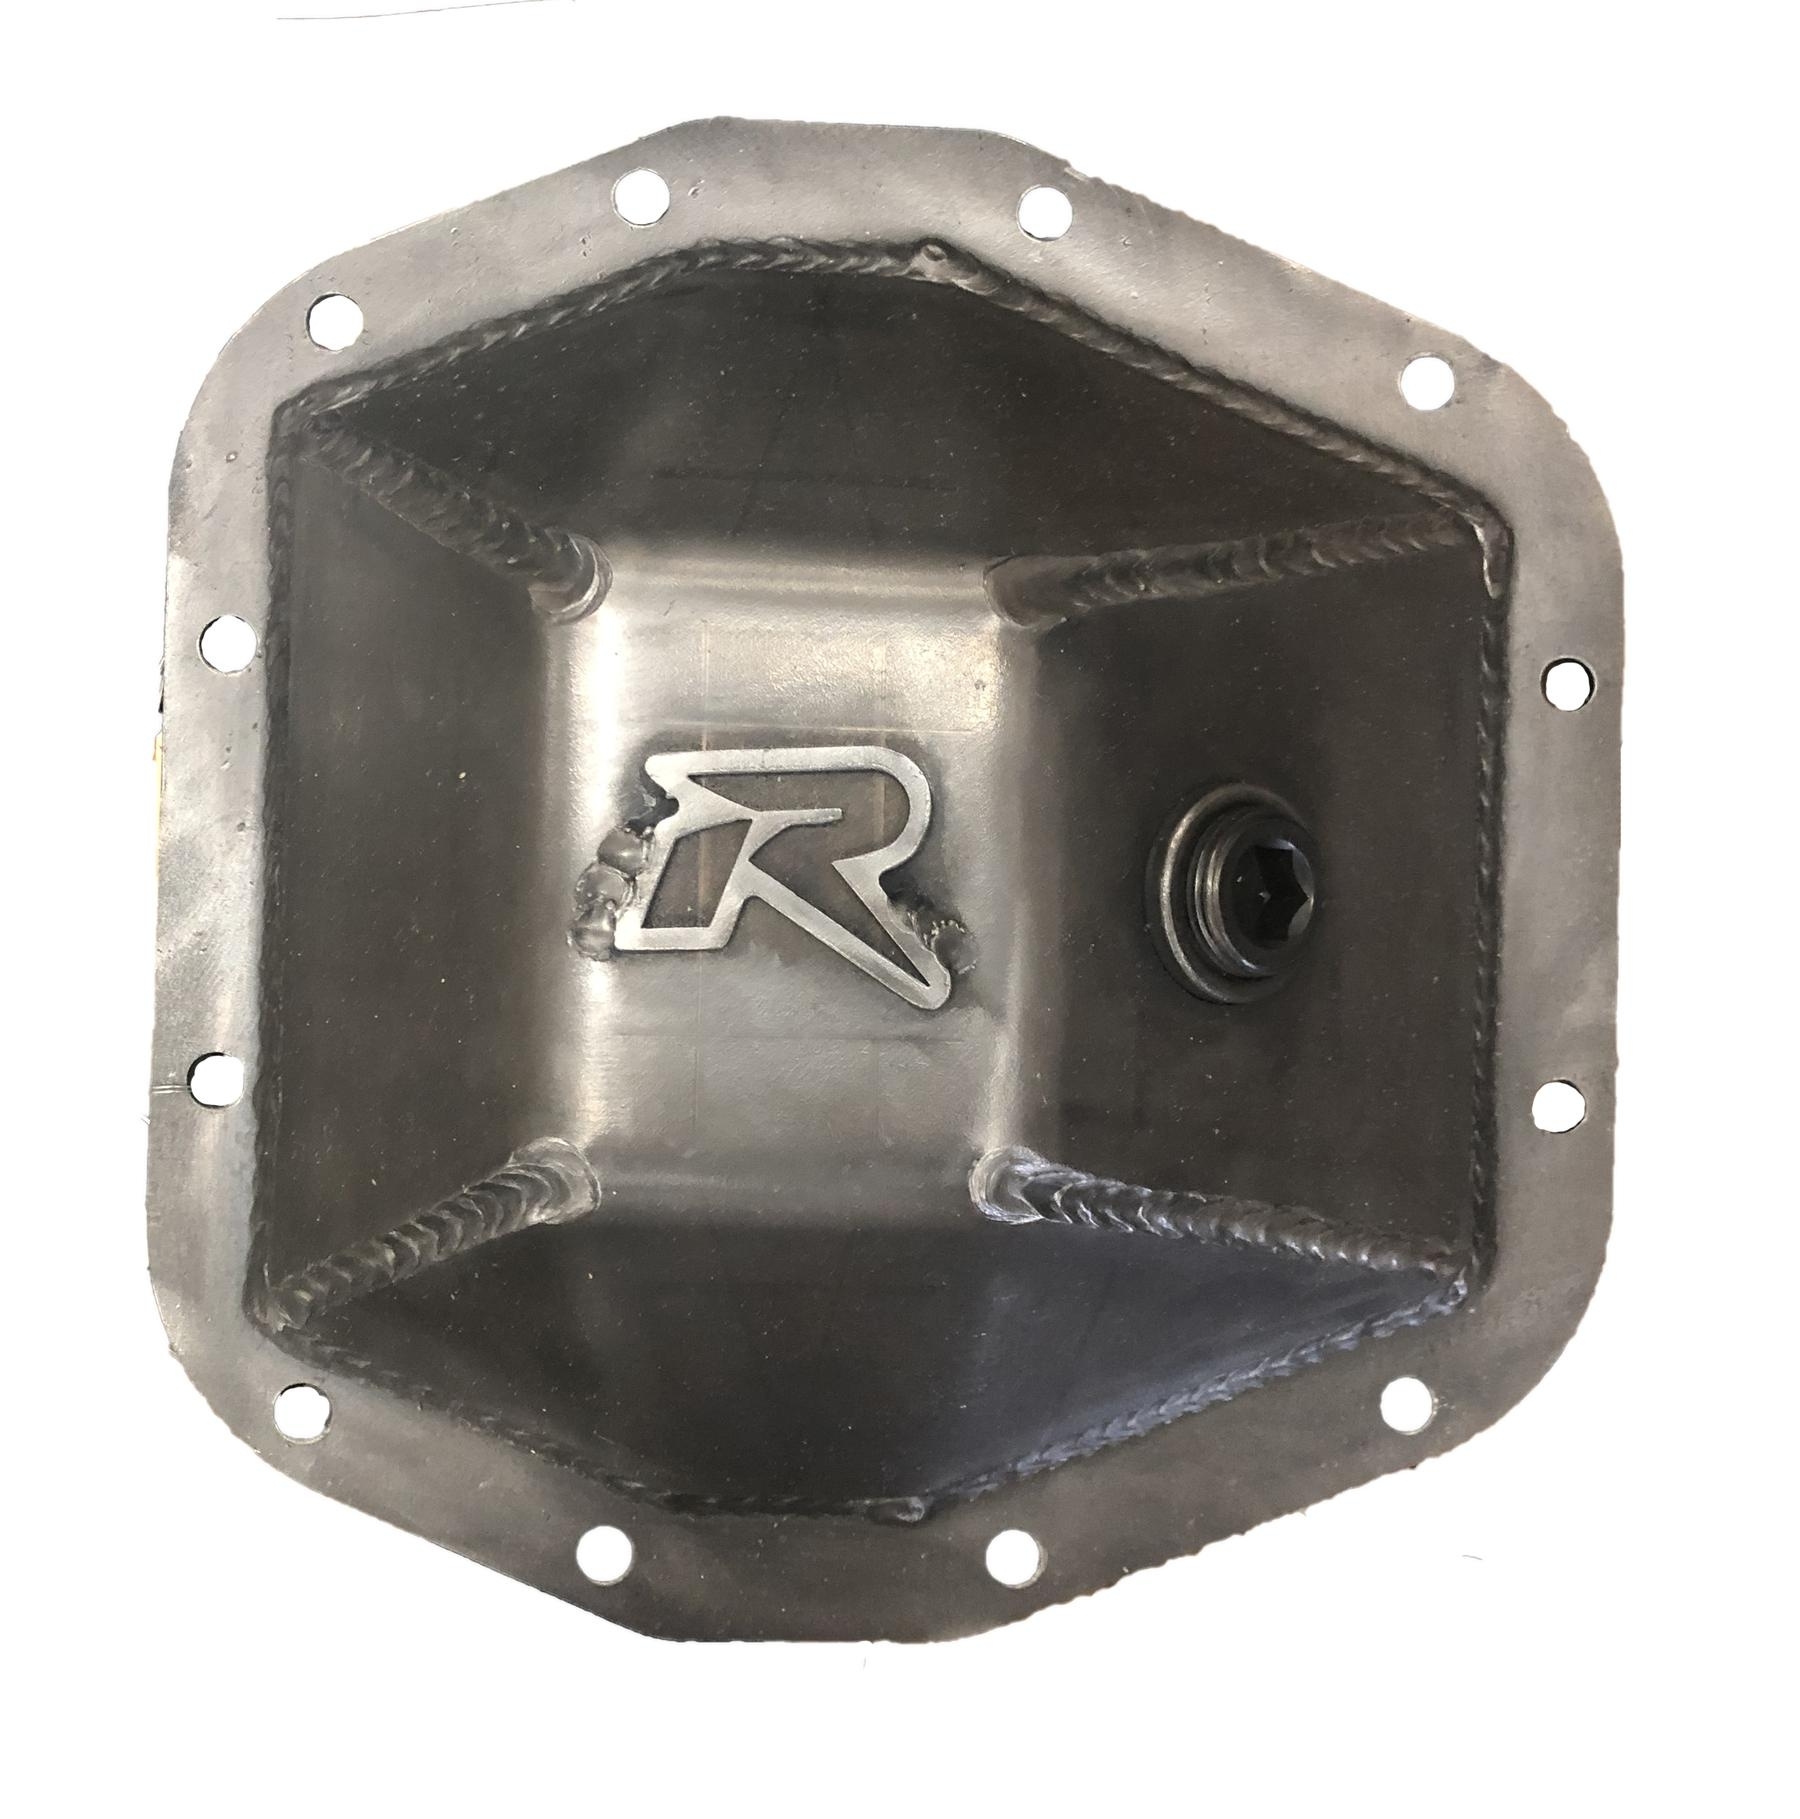 Revolution Gear & Axle Heavy Duty Differential Cover, Ford 8.8